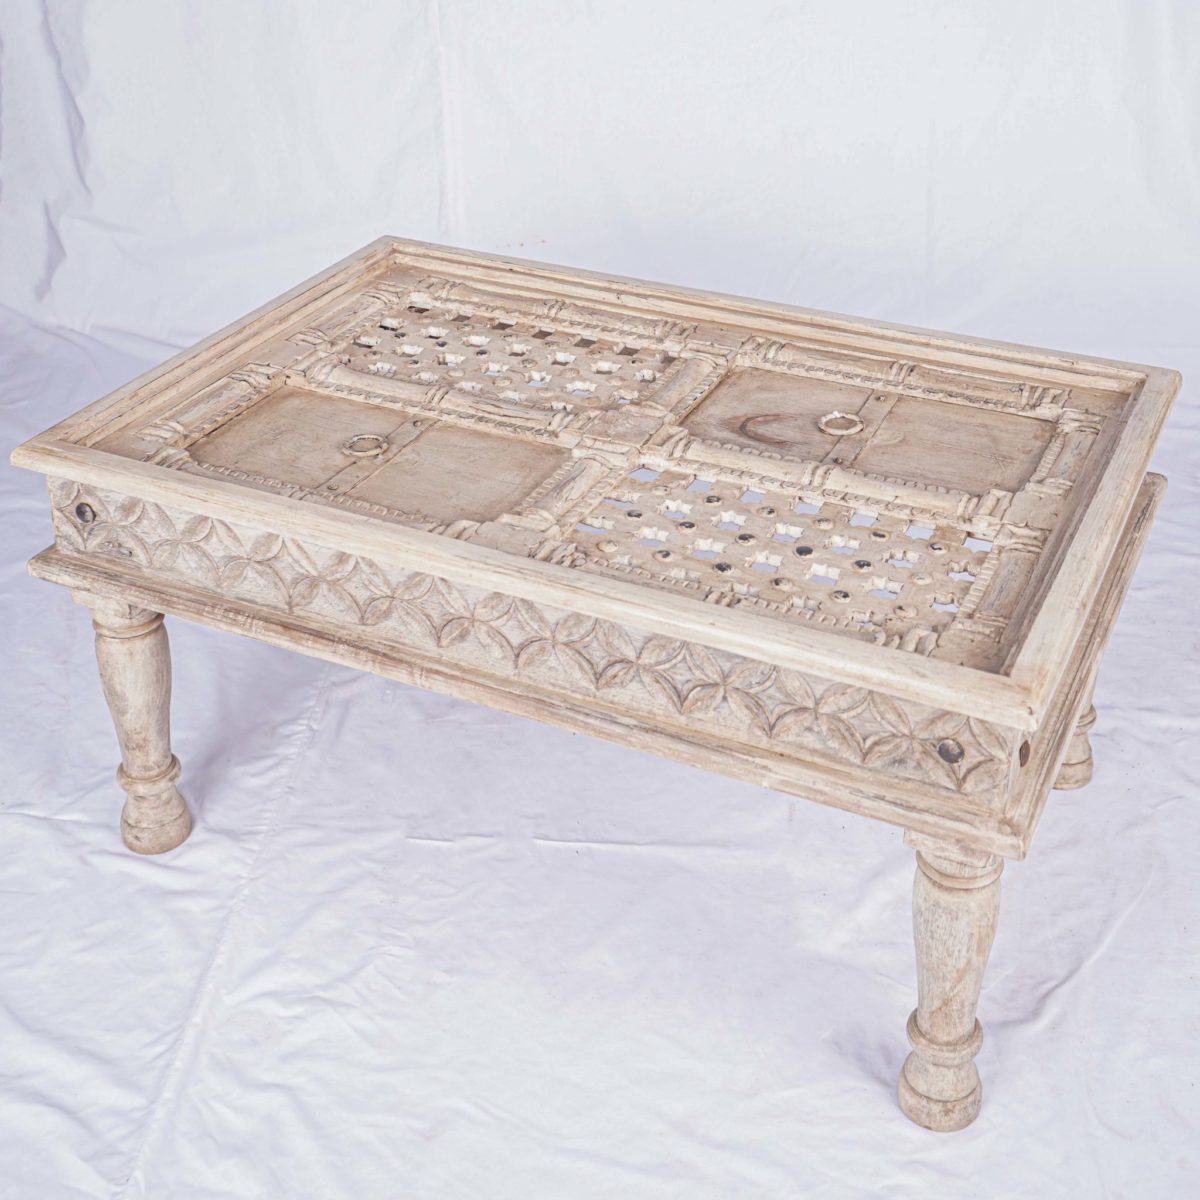 Hand carved wooden coffee table art decor